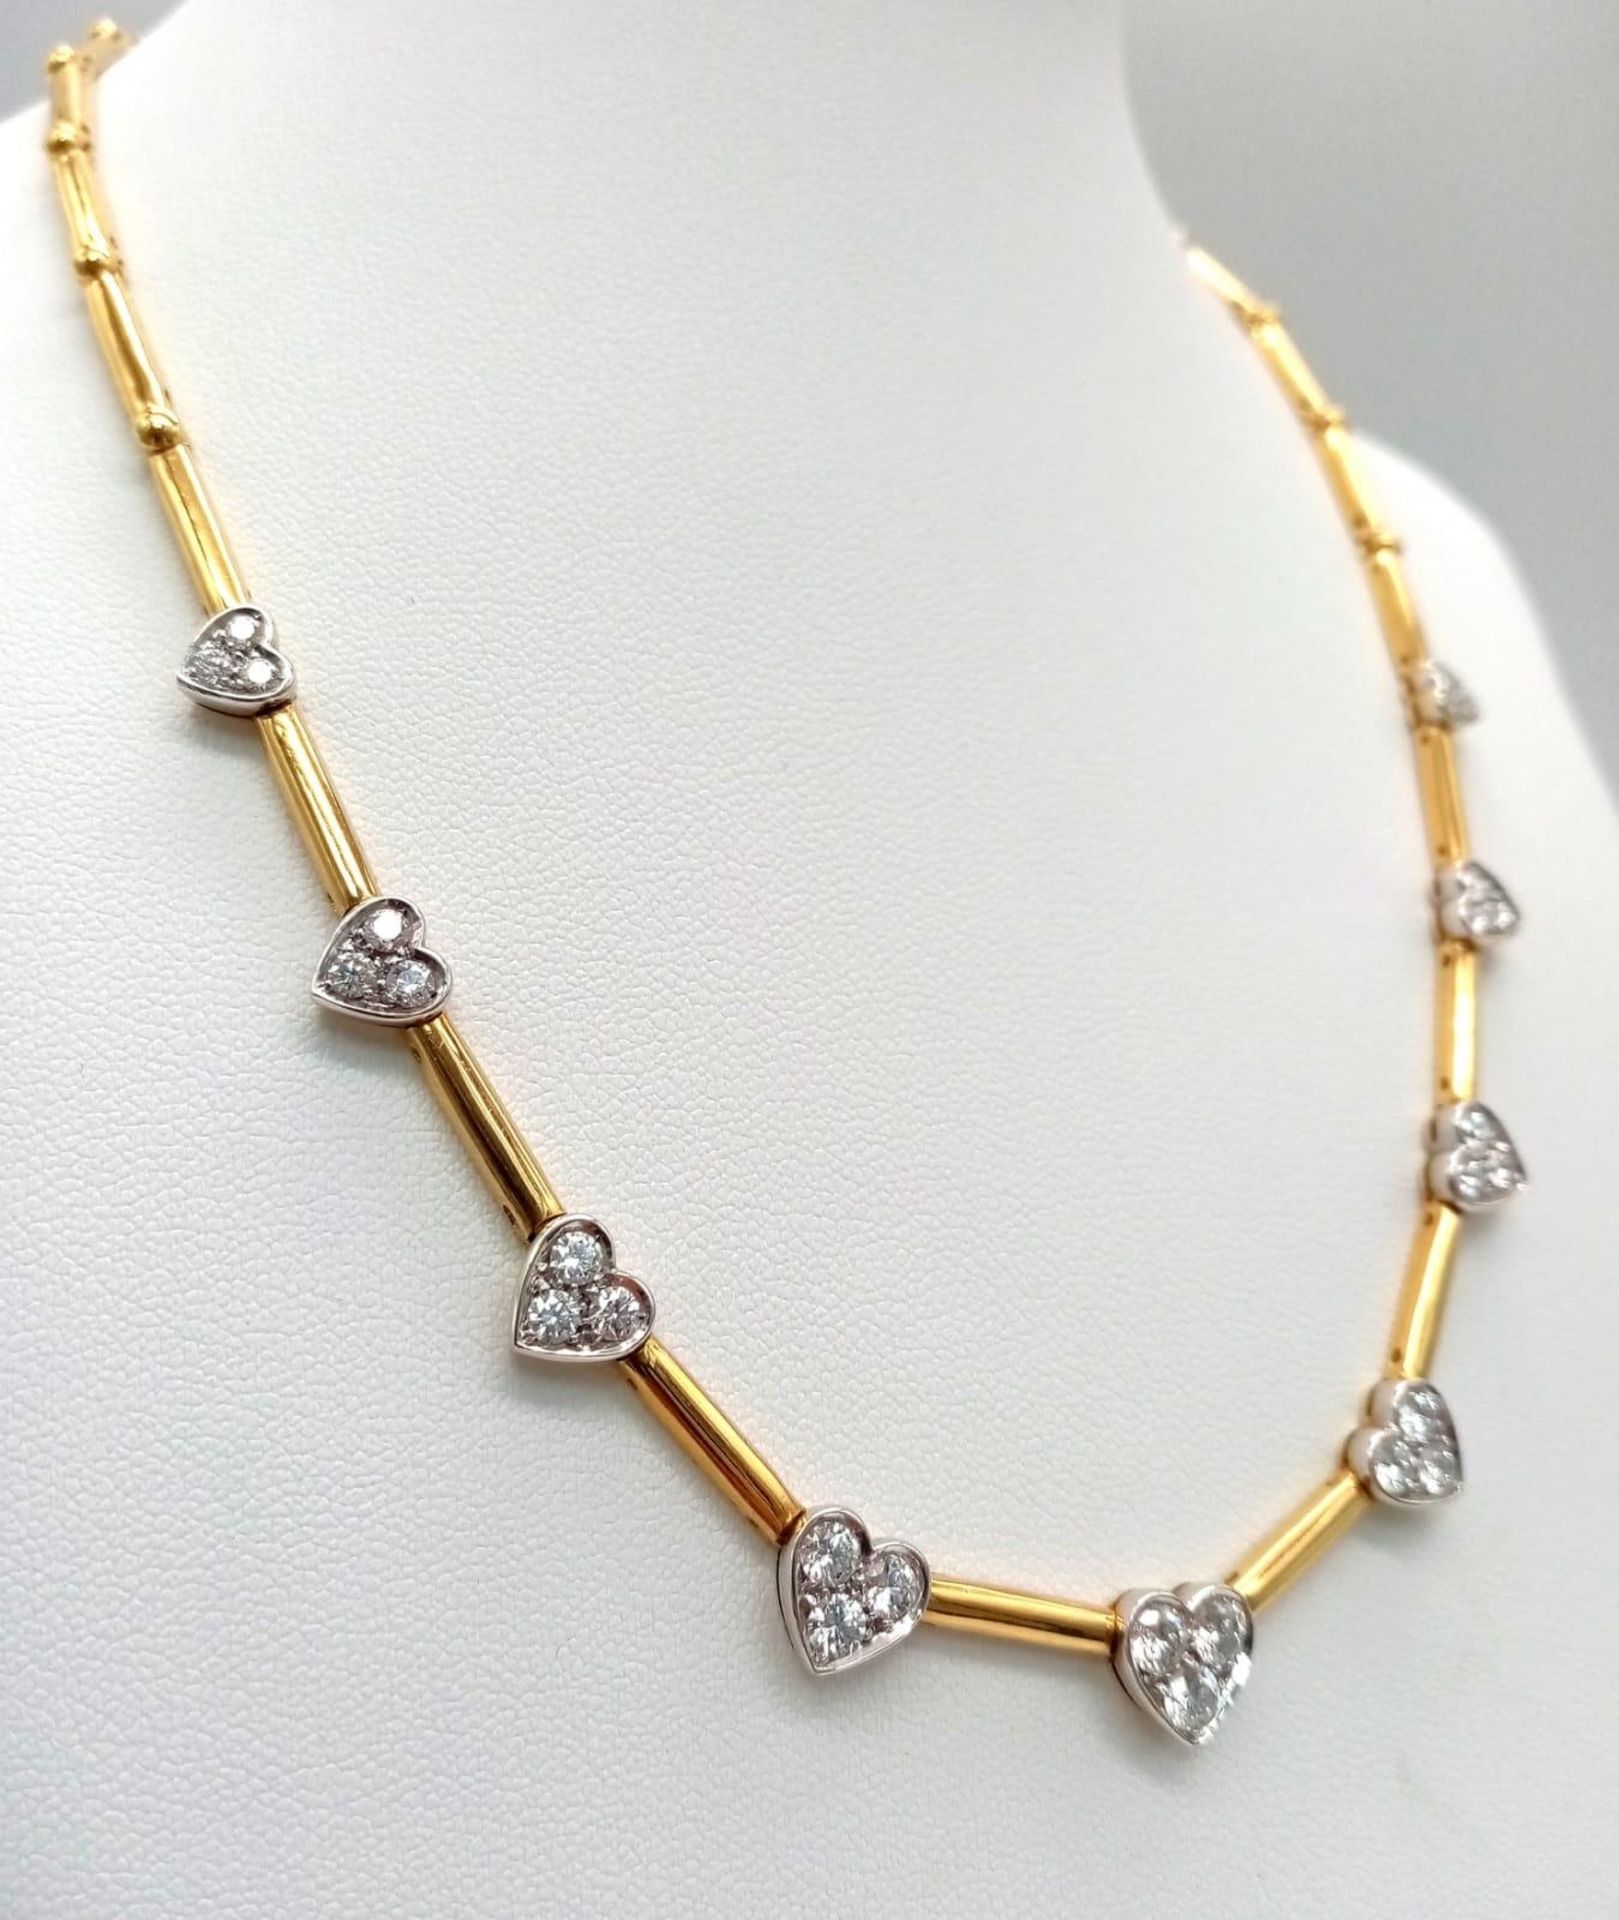 A Gorgeous 18K Gold and Heart-Diamond Necklace and Bracelet Set. The necklace is decorated with - Image 3 of 21